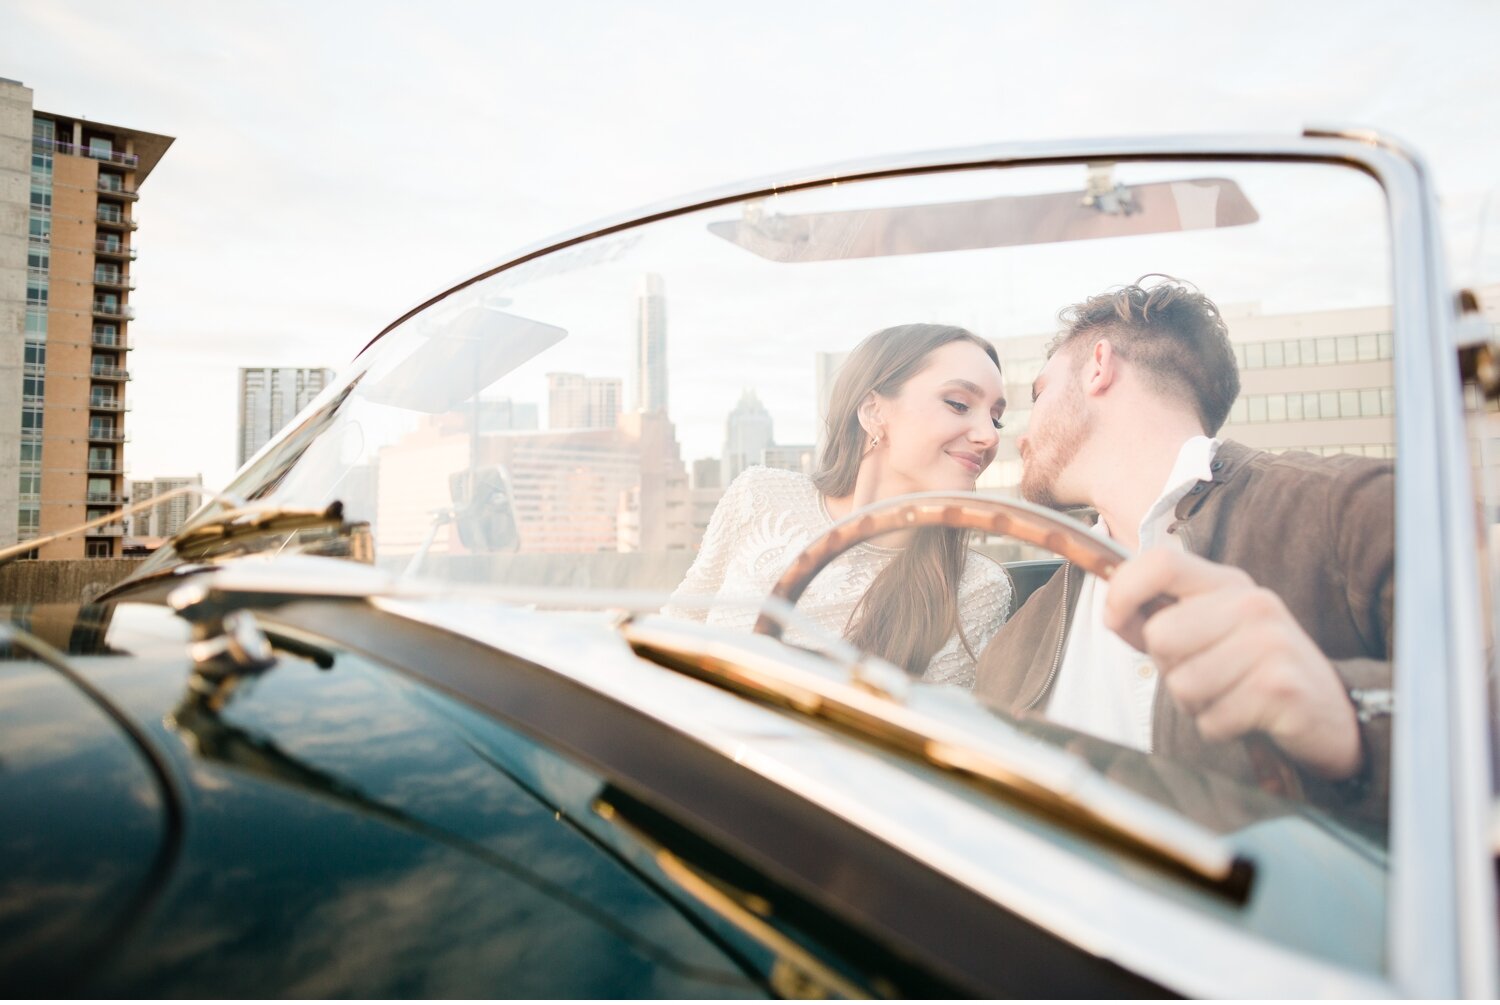 London + Christian Downtown Austin Rooftop Classic Car Engagement Session_0033.jpg